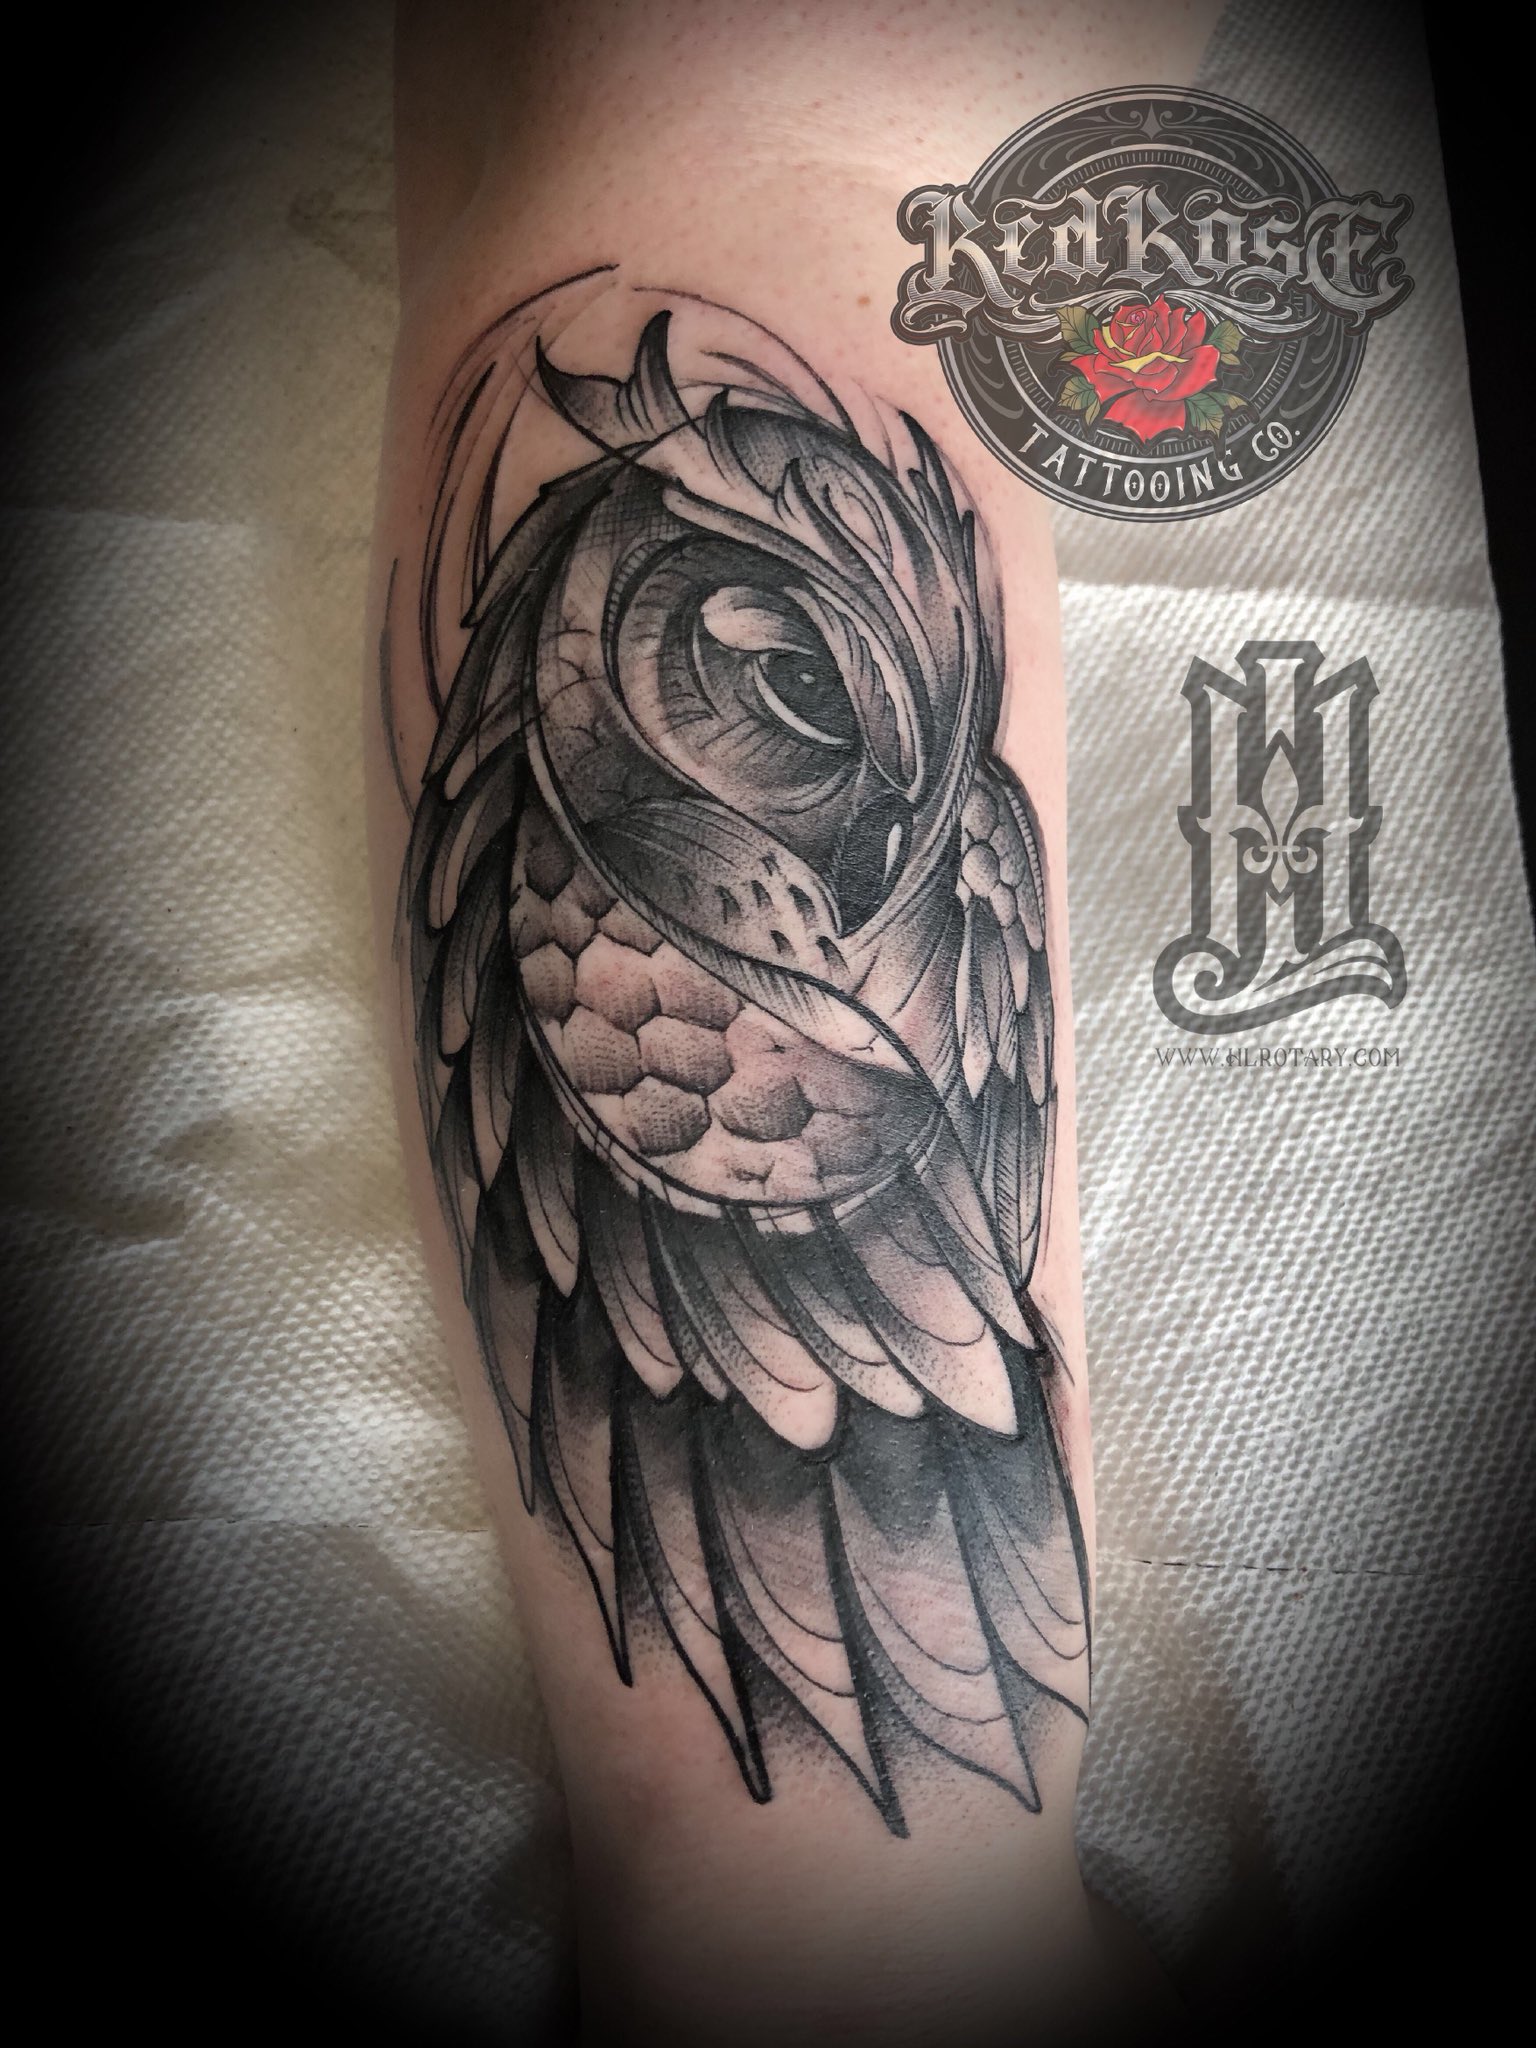 150 Brilliant Owl Tattoo Designs  Their Meanings